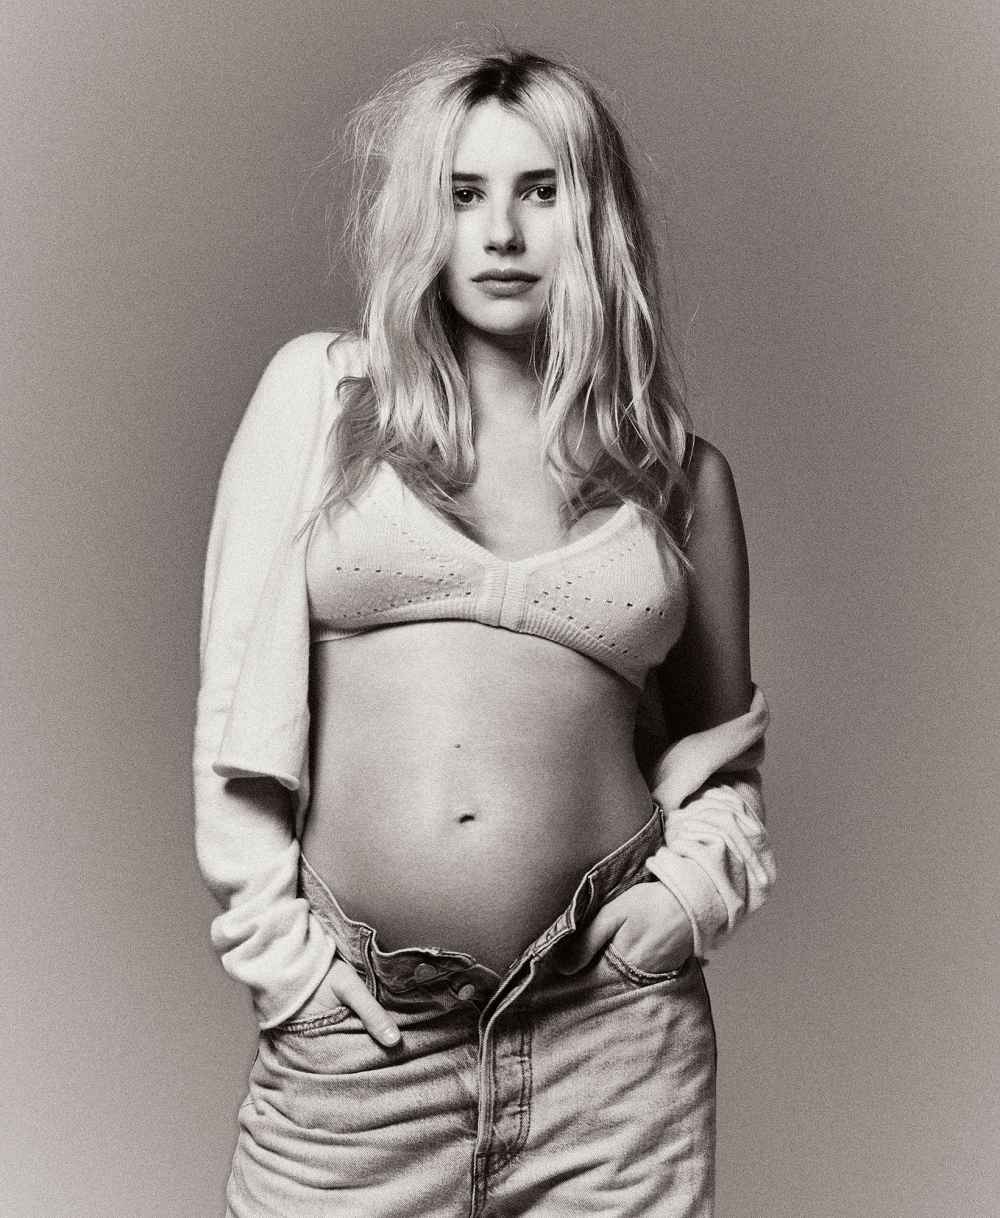 Emma Roberts Goes from Dressed Down to Done-Up in Pregnancy Photo Shoot